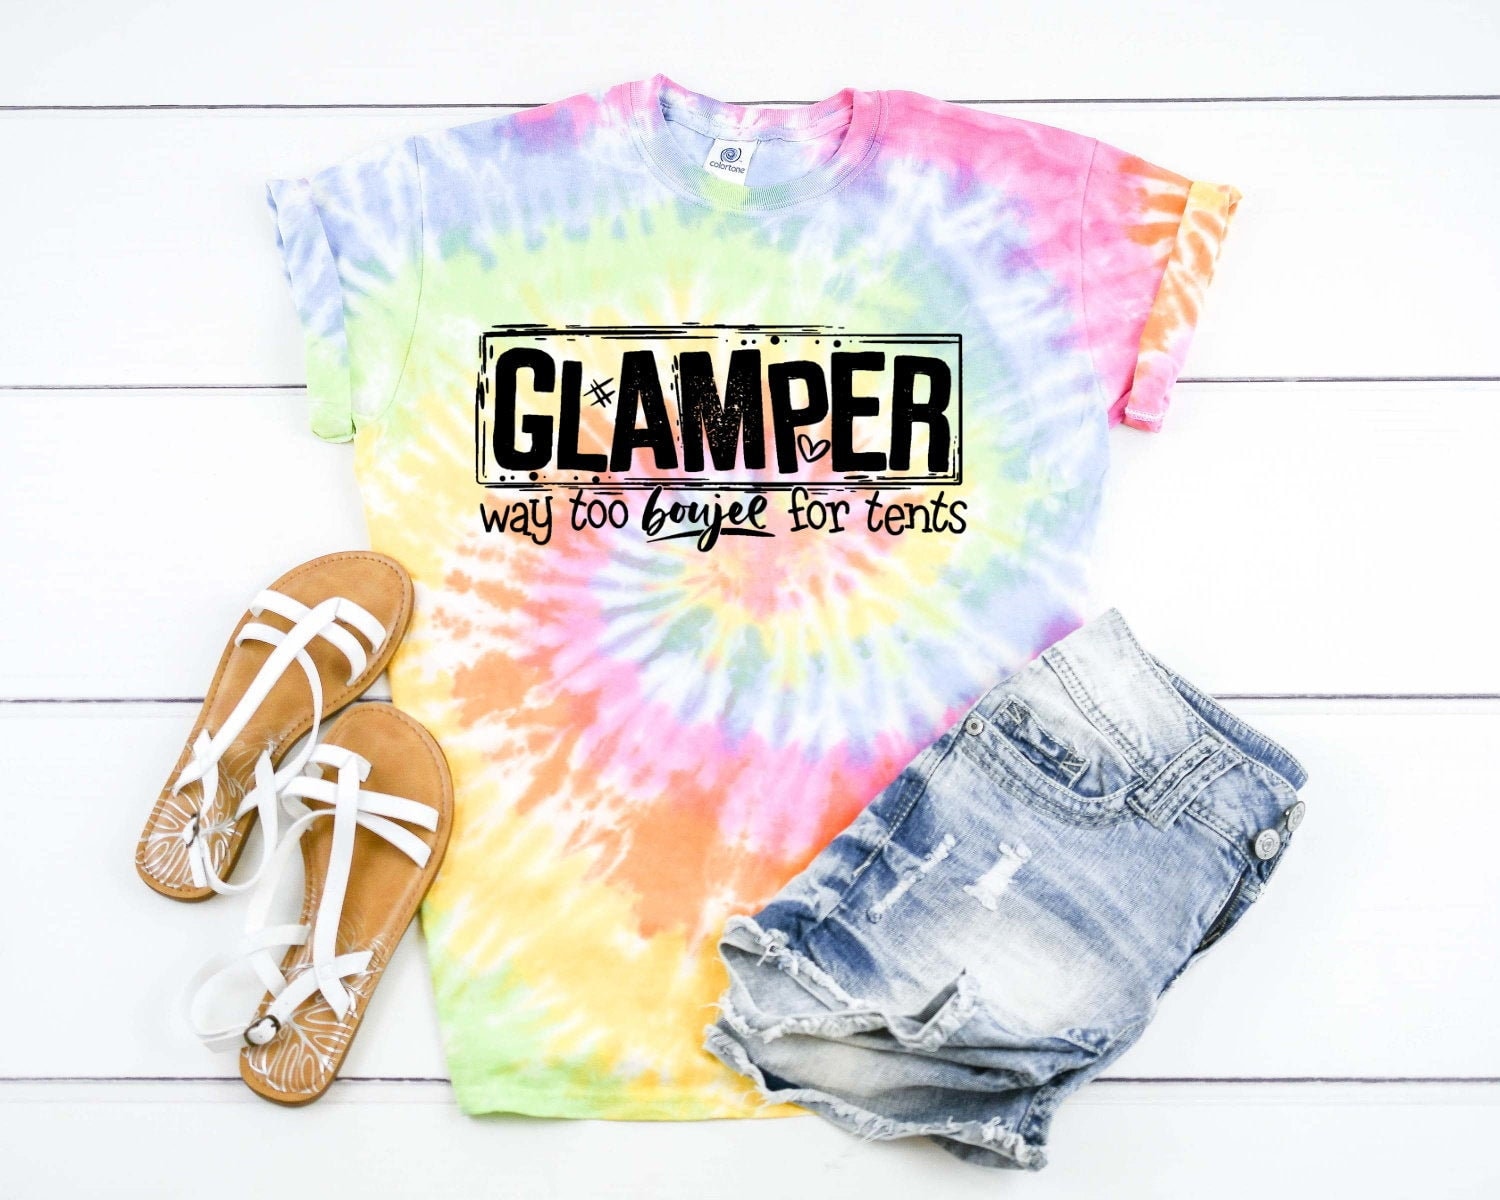 Glamper Way to Boujee for Tents, Happy Glamper, Happy Camper Camping RV Camp Tie Dye Graphic Tee T-Shirt